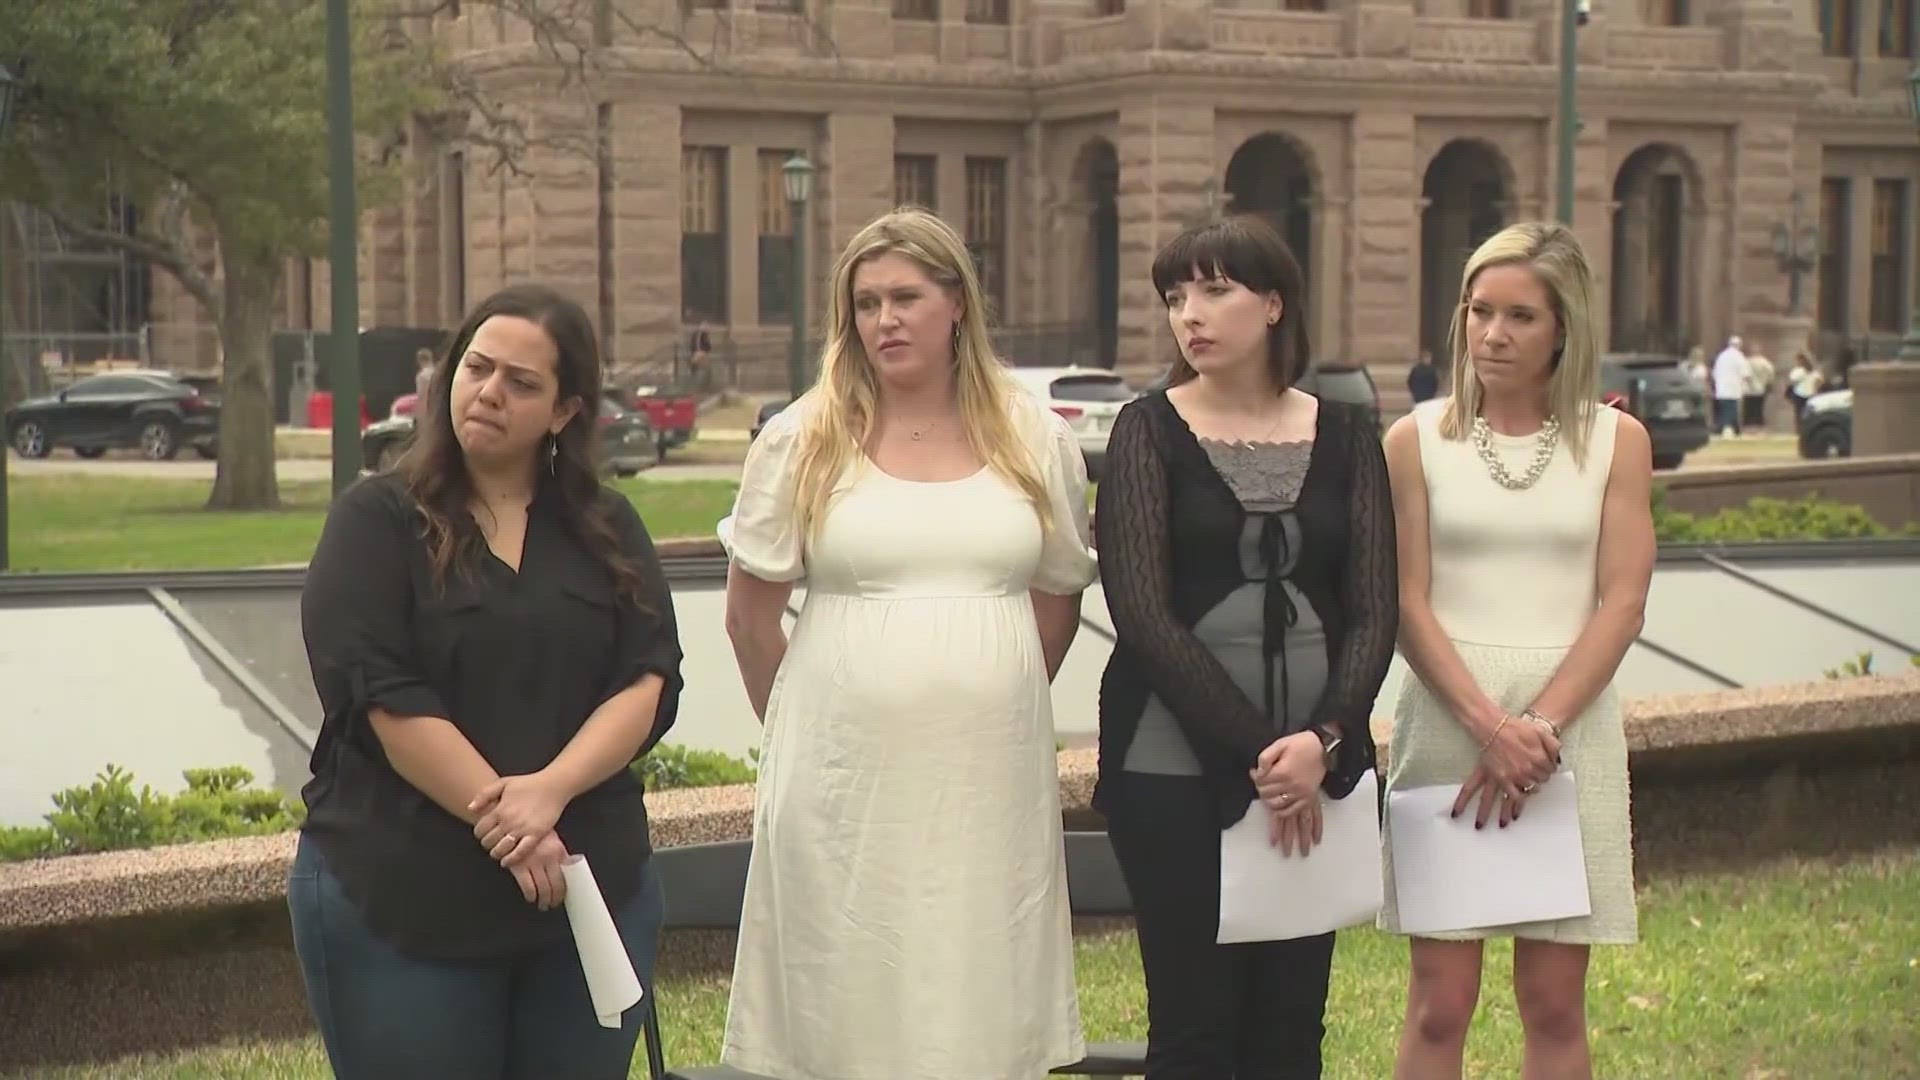 Five Texas women, including three from Dallas, are suing the state, claiming abortion bans have put their health and lives at risk.